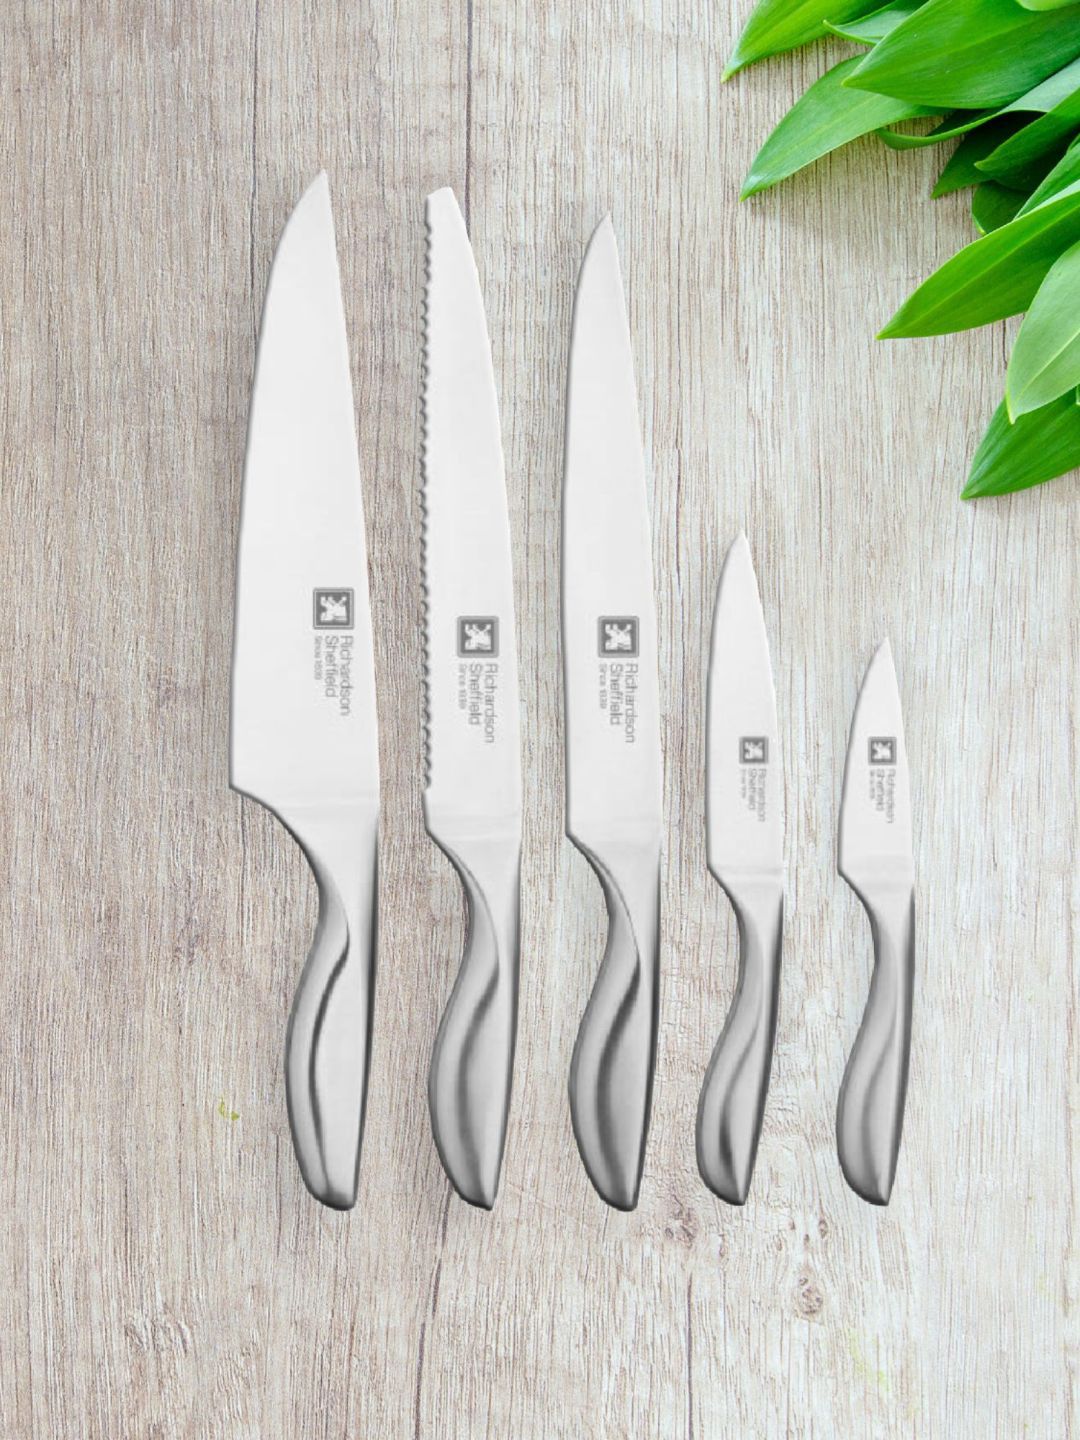 Richardson Sheffield Set Of 5 Silver-Toned Solid Stainless Steel Knife Set Price in India